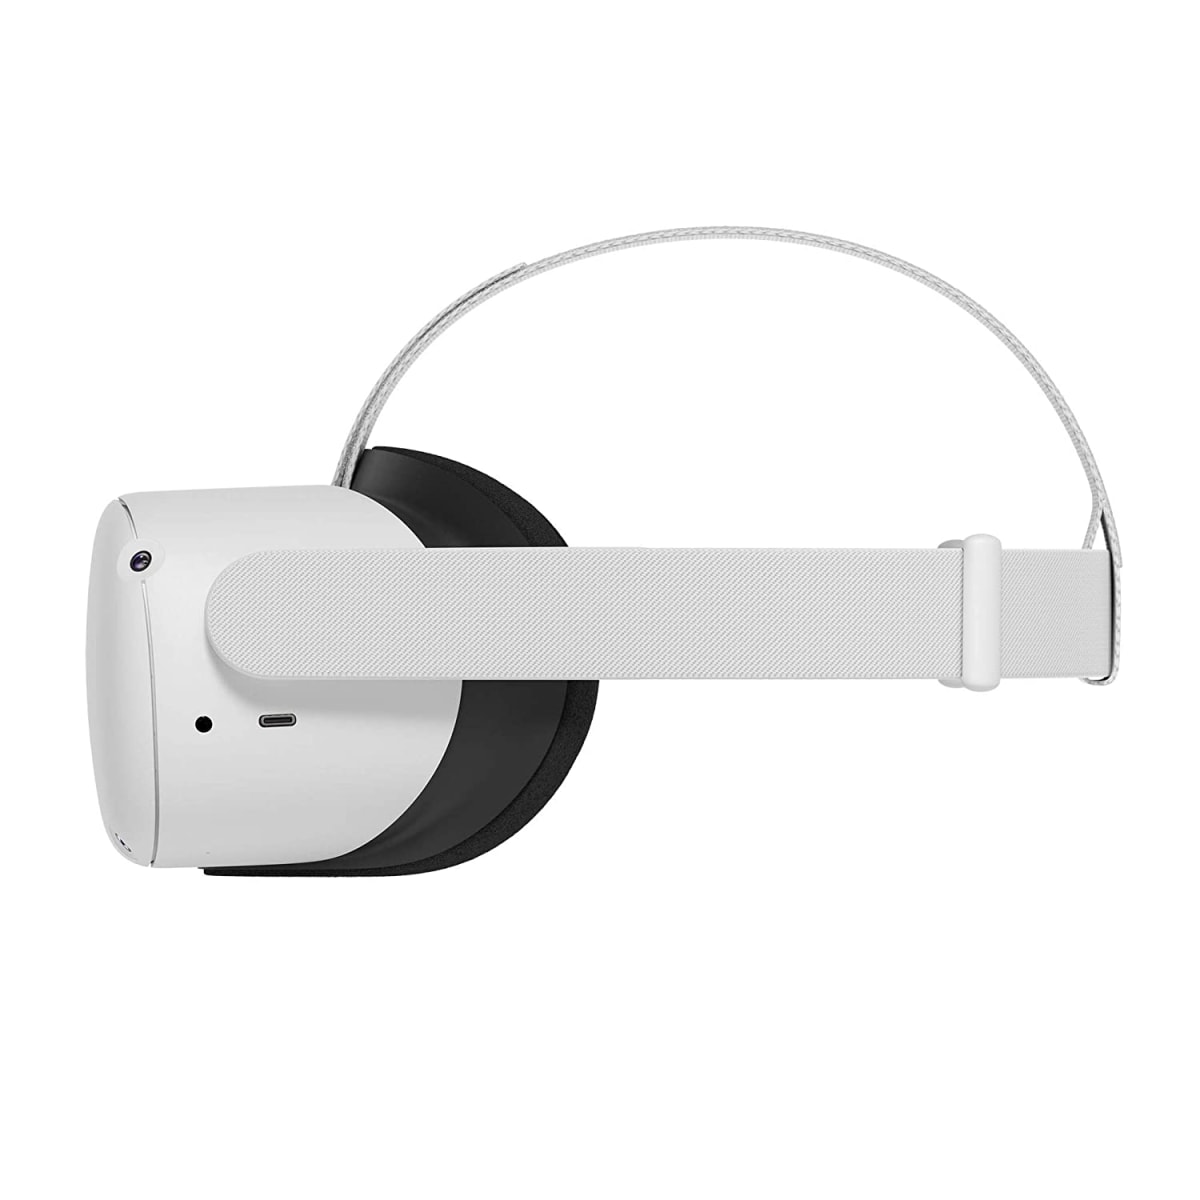 Oculus included strap